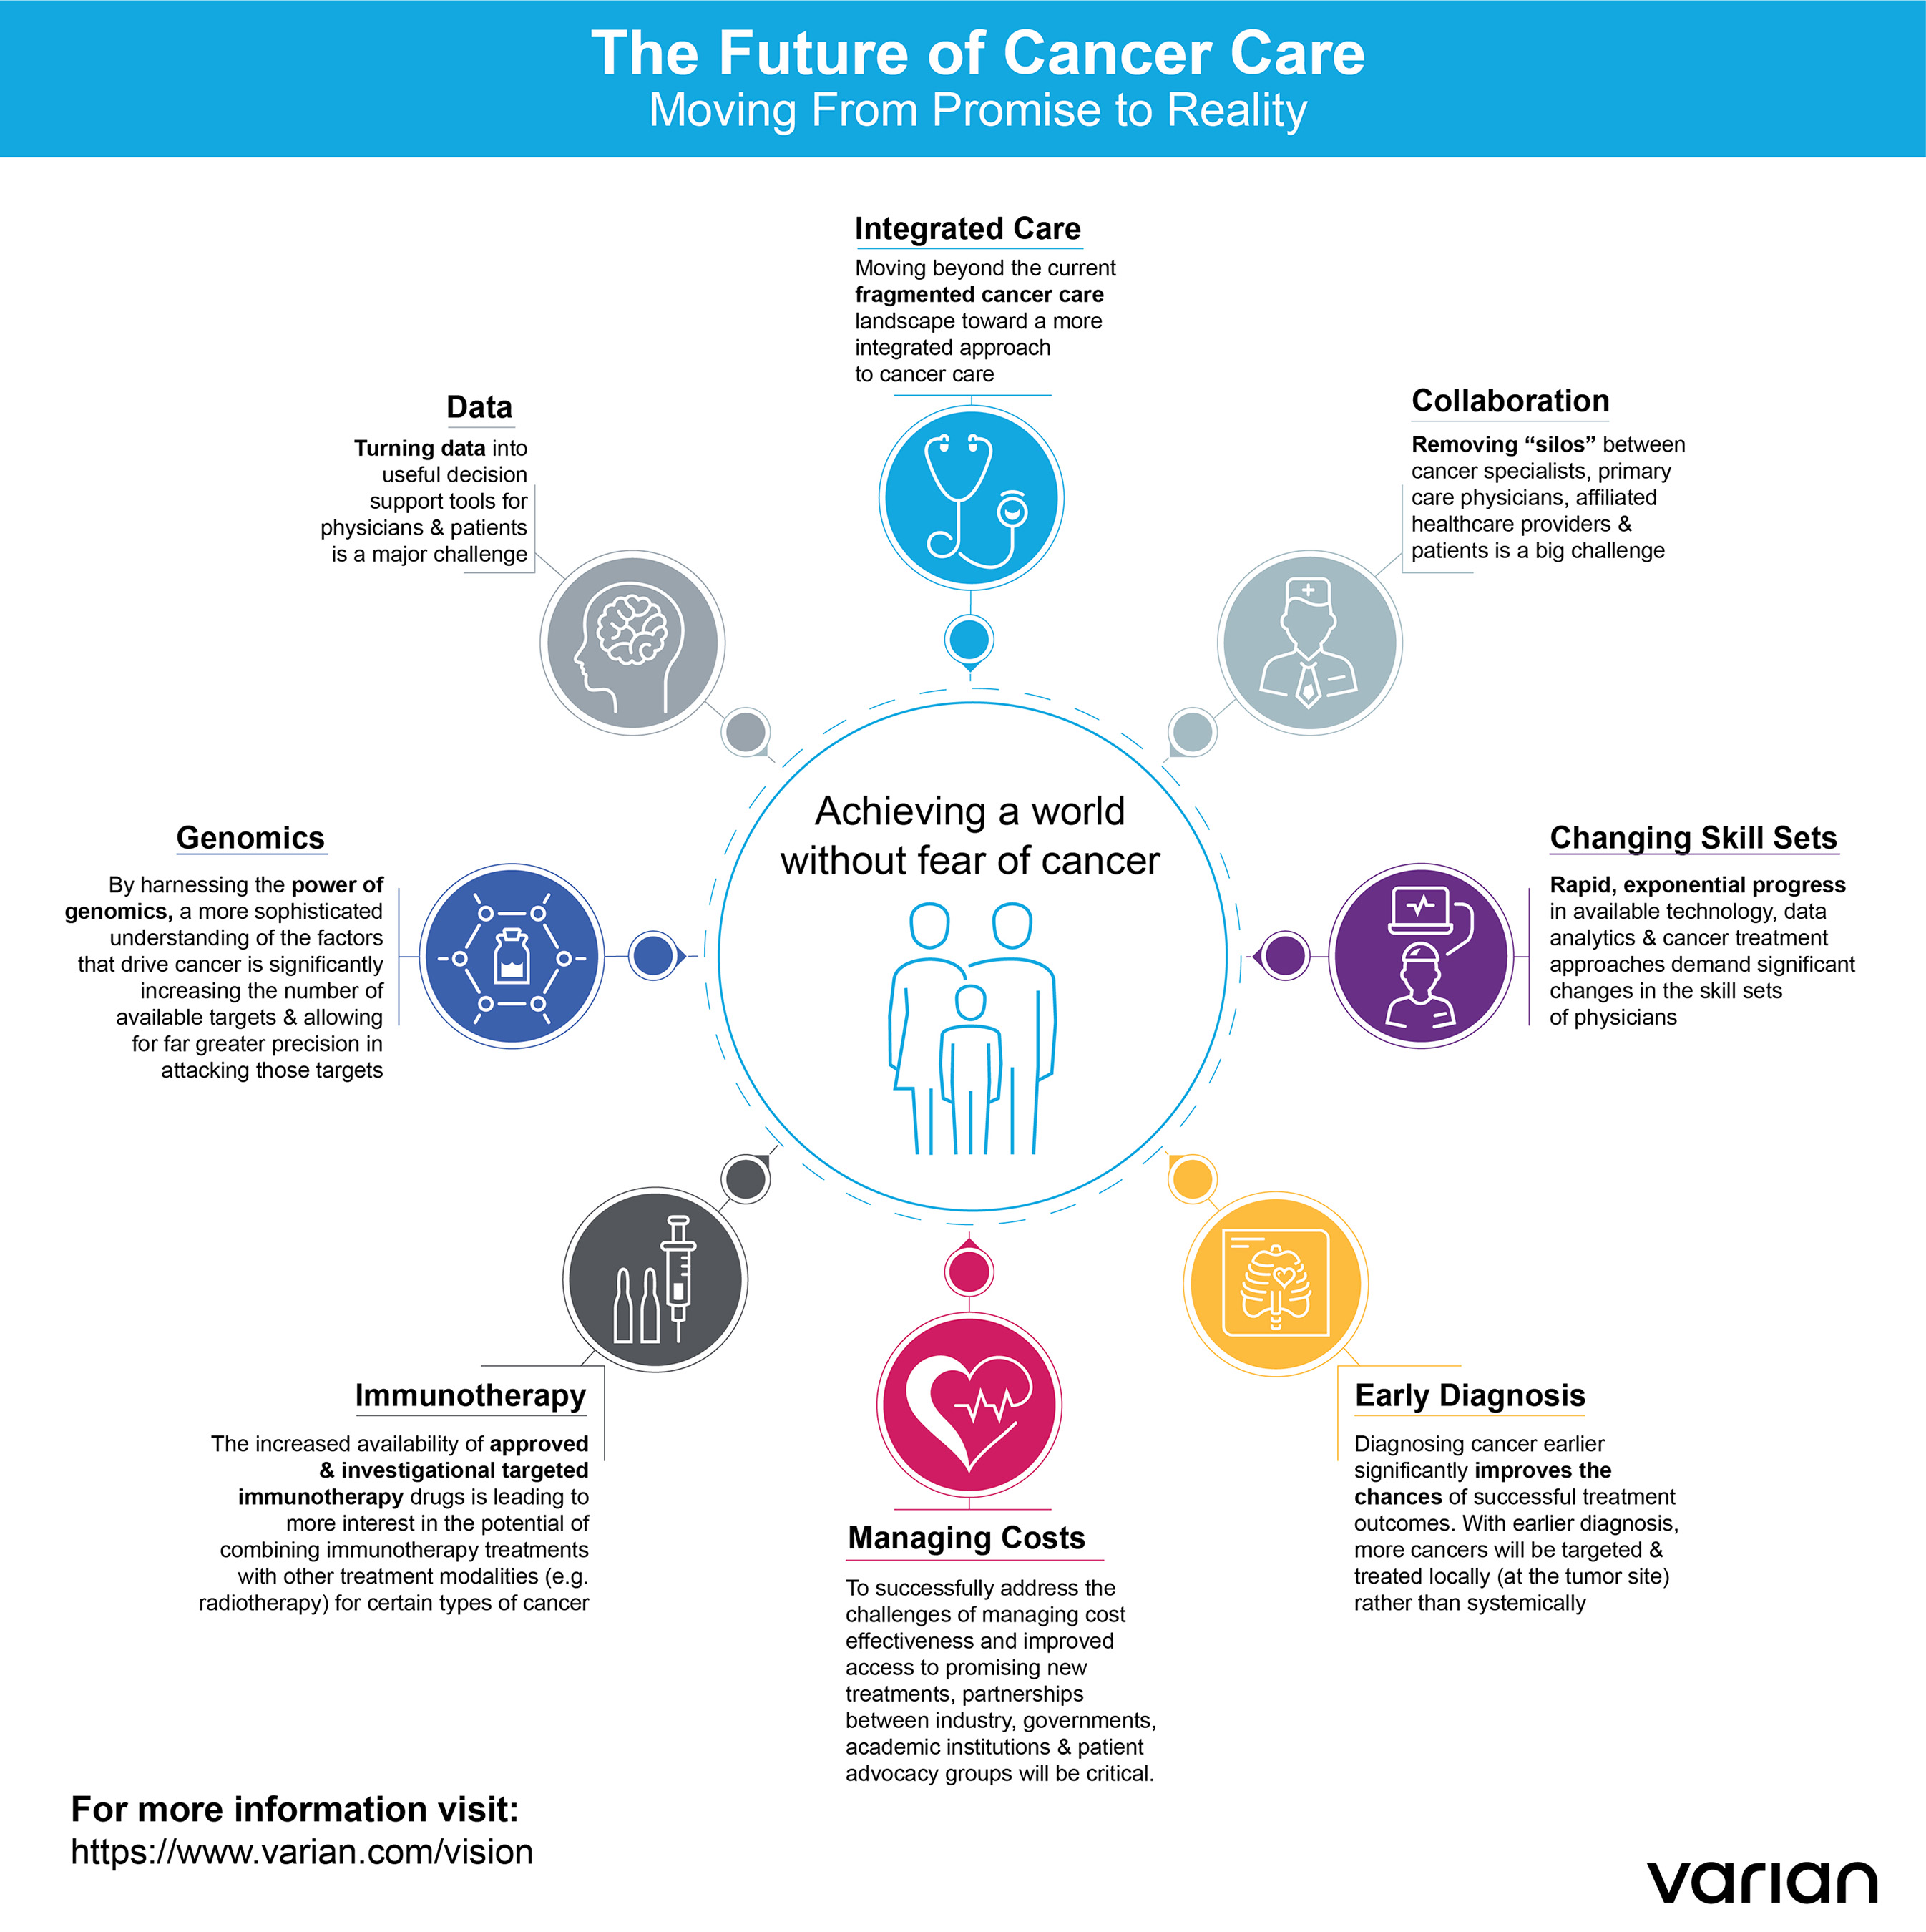 The Future of Cancer Care